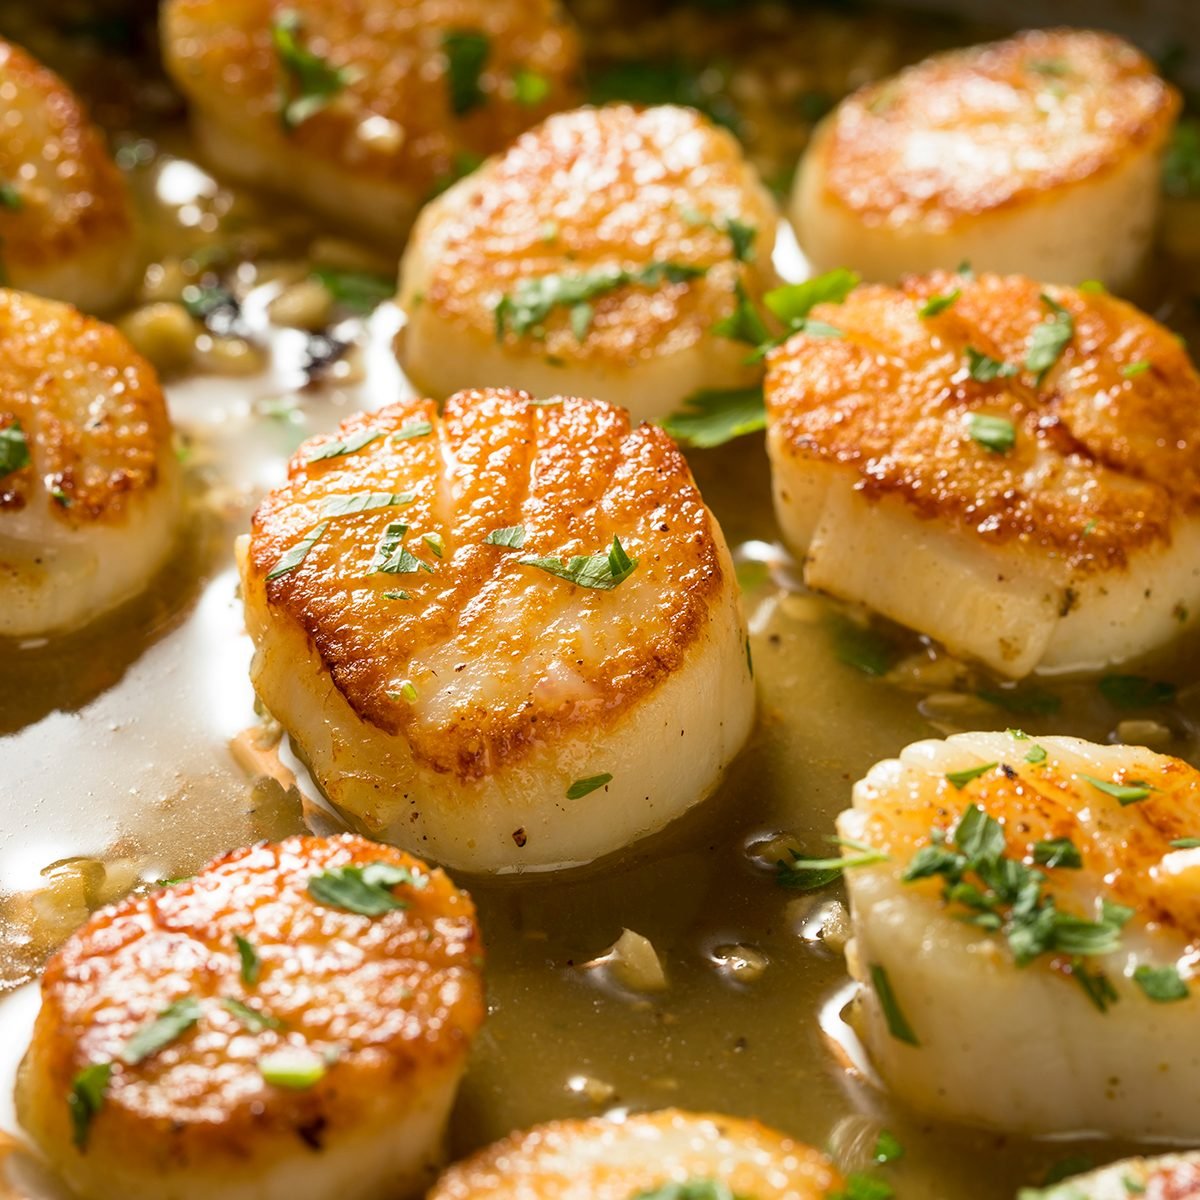 https://www.tasteofhome.com/wp-content/uploads/2020/02/panned-seared-scallops-in-broth-GettyImages-1017190092.jpg?fit=700%2C700